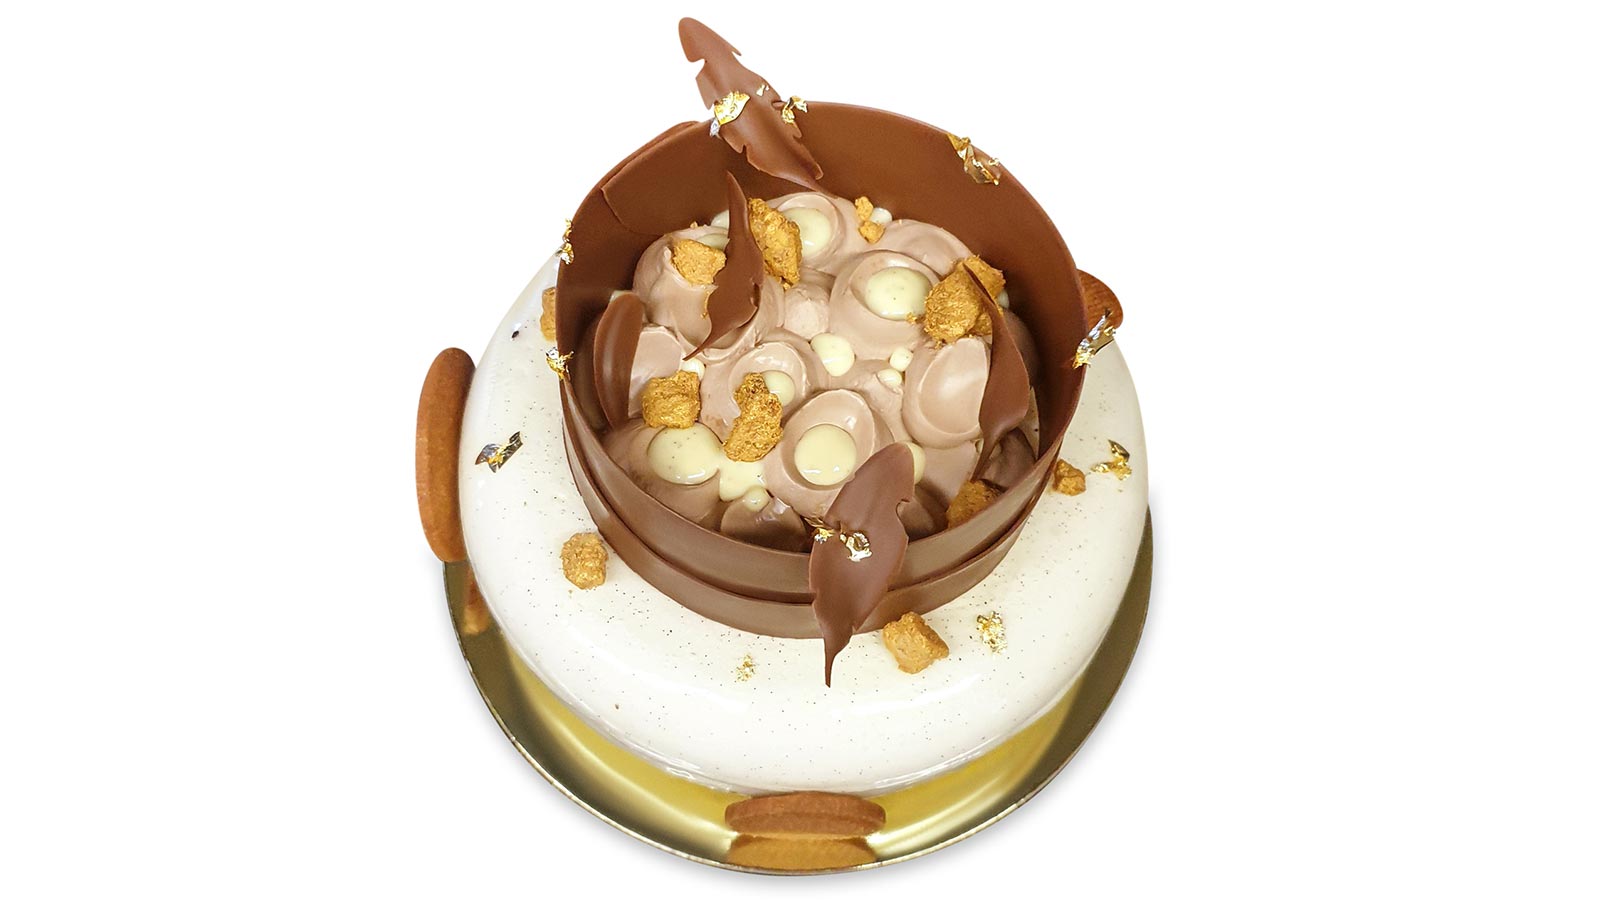 Maple Entremet Recipe by Ottawa's Chef Yann Le Coz is Published in Pastry Arts Magazine